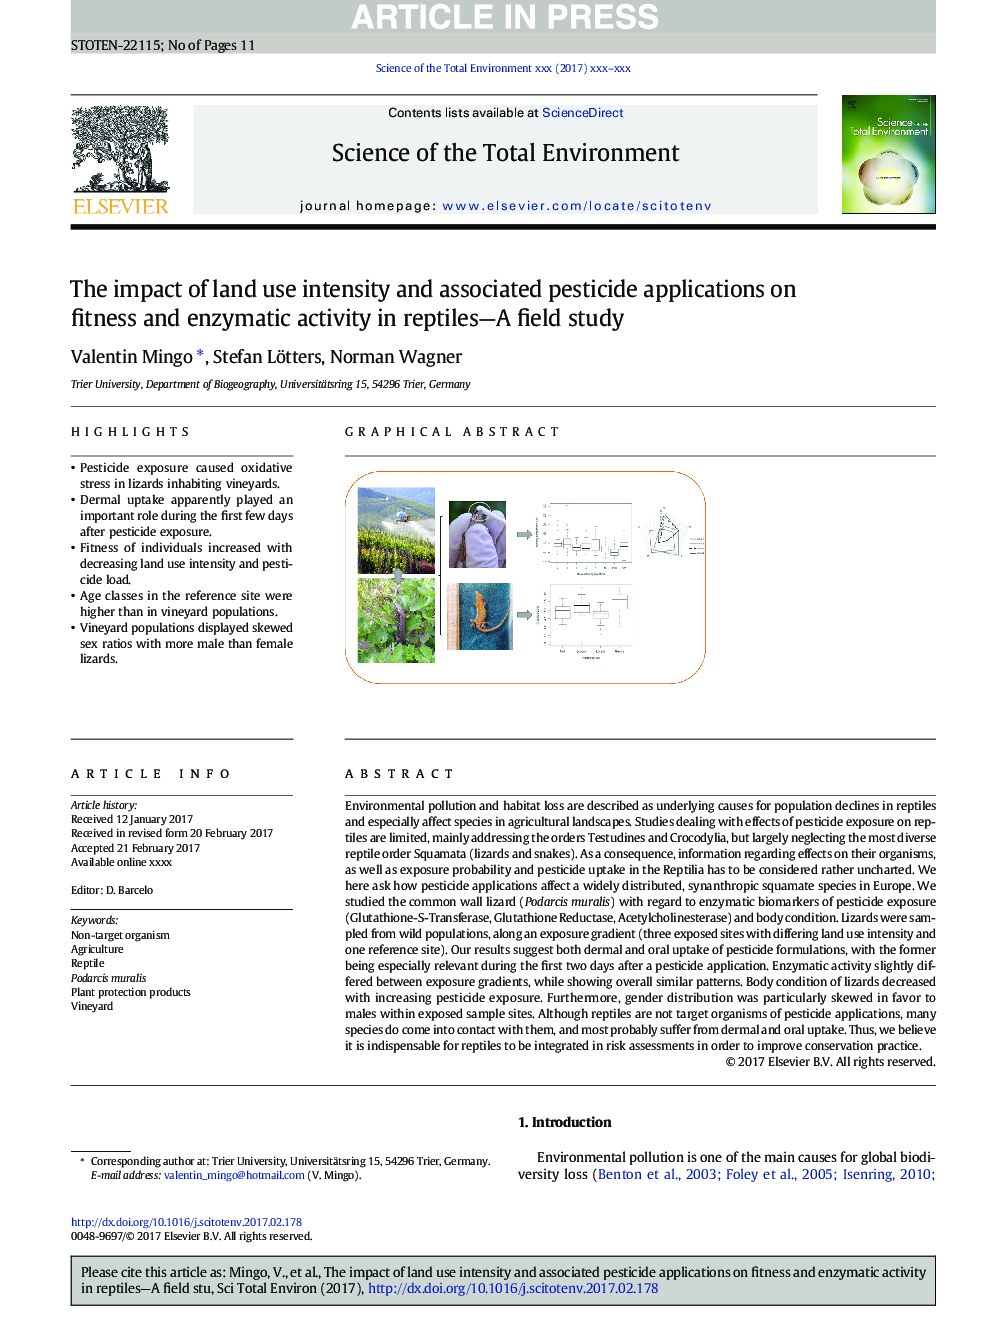 The impact of land use intensity and associated pesticide applications on fitness and enzymatic activity in reptiles-A field study